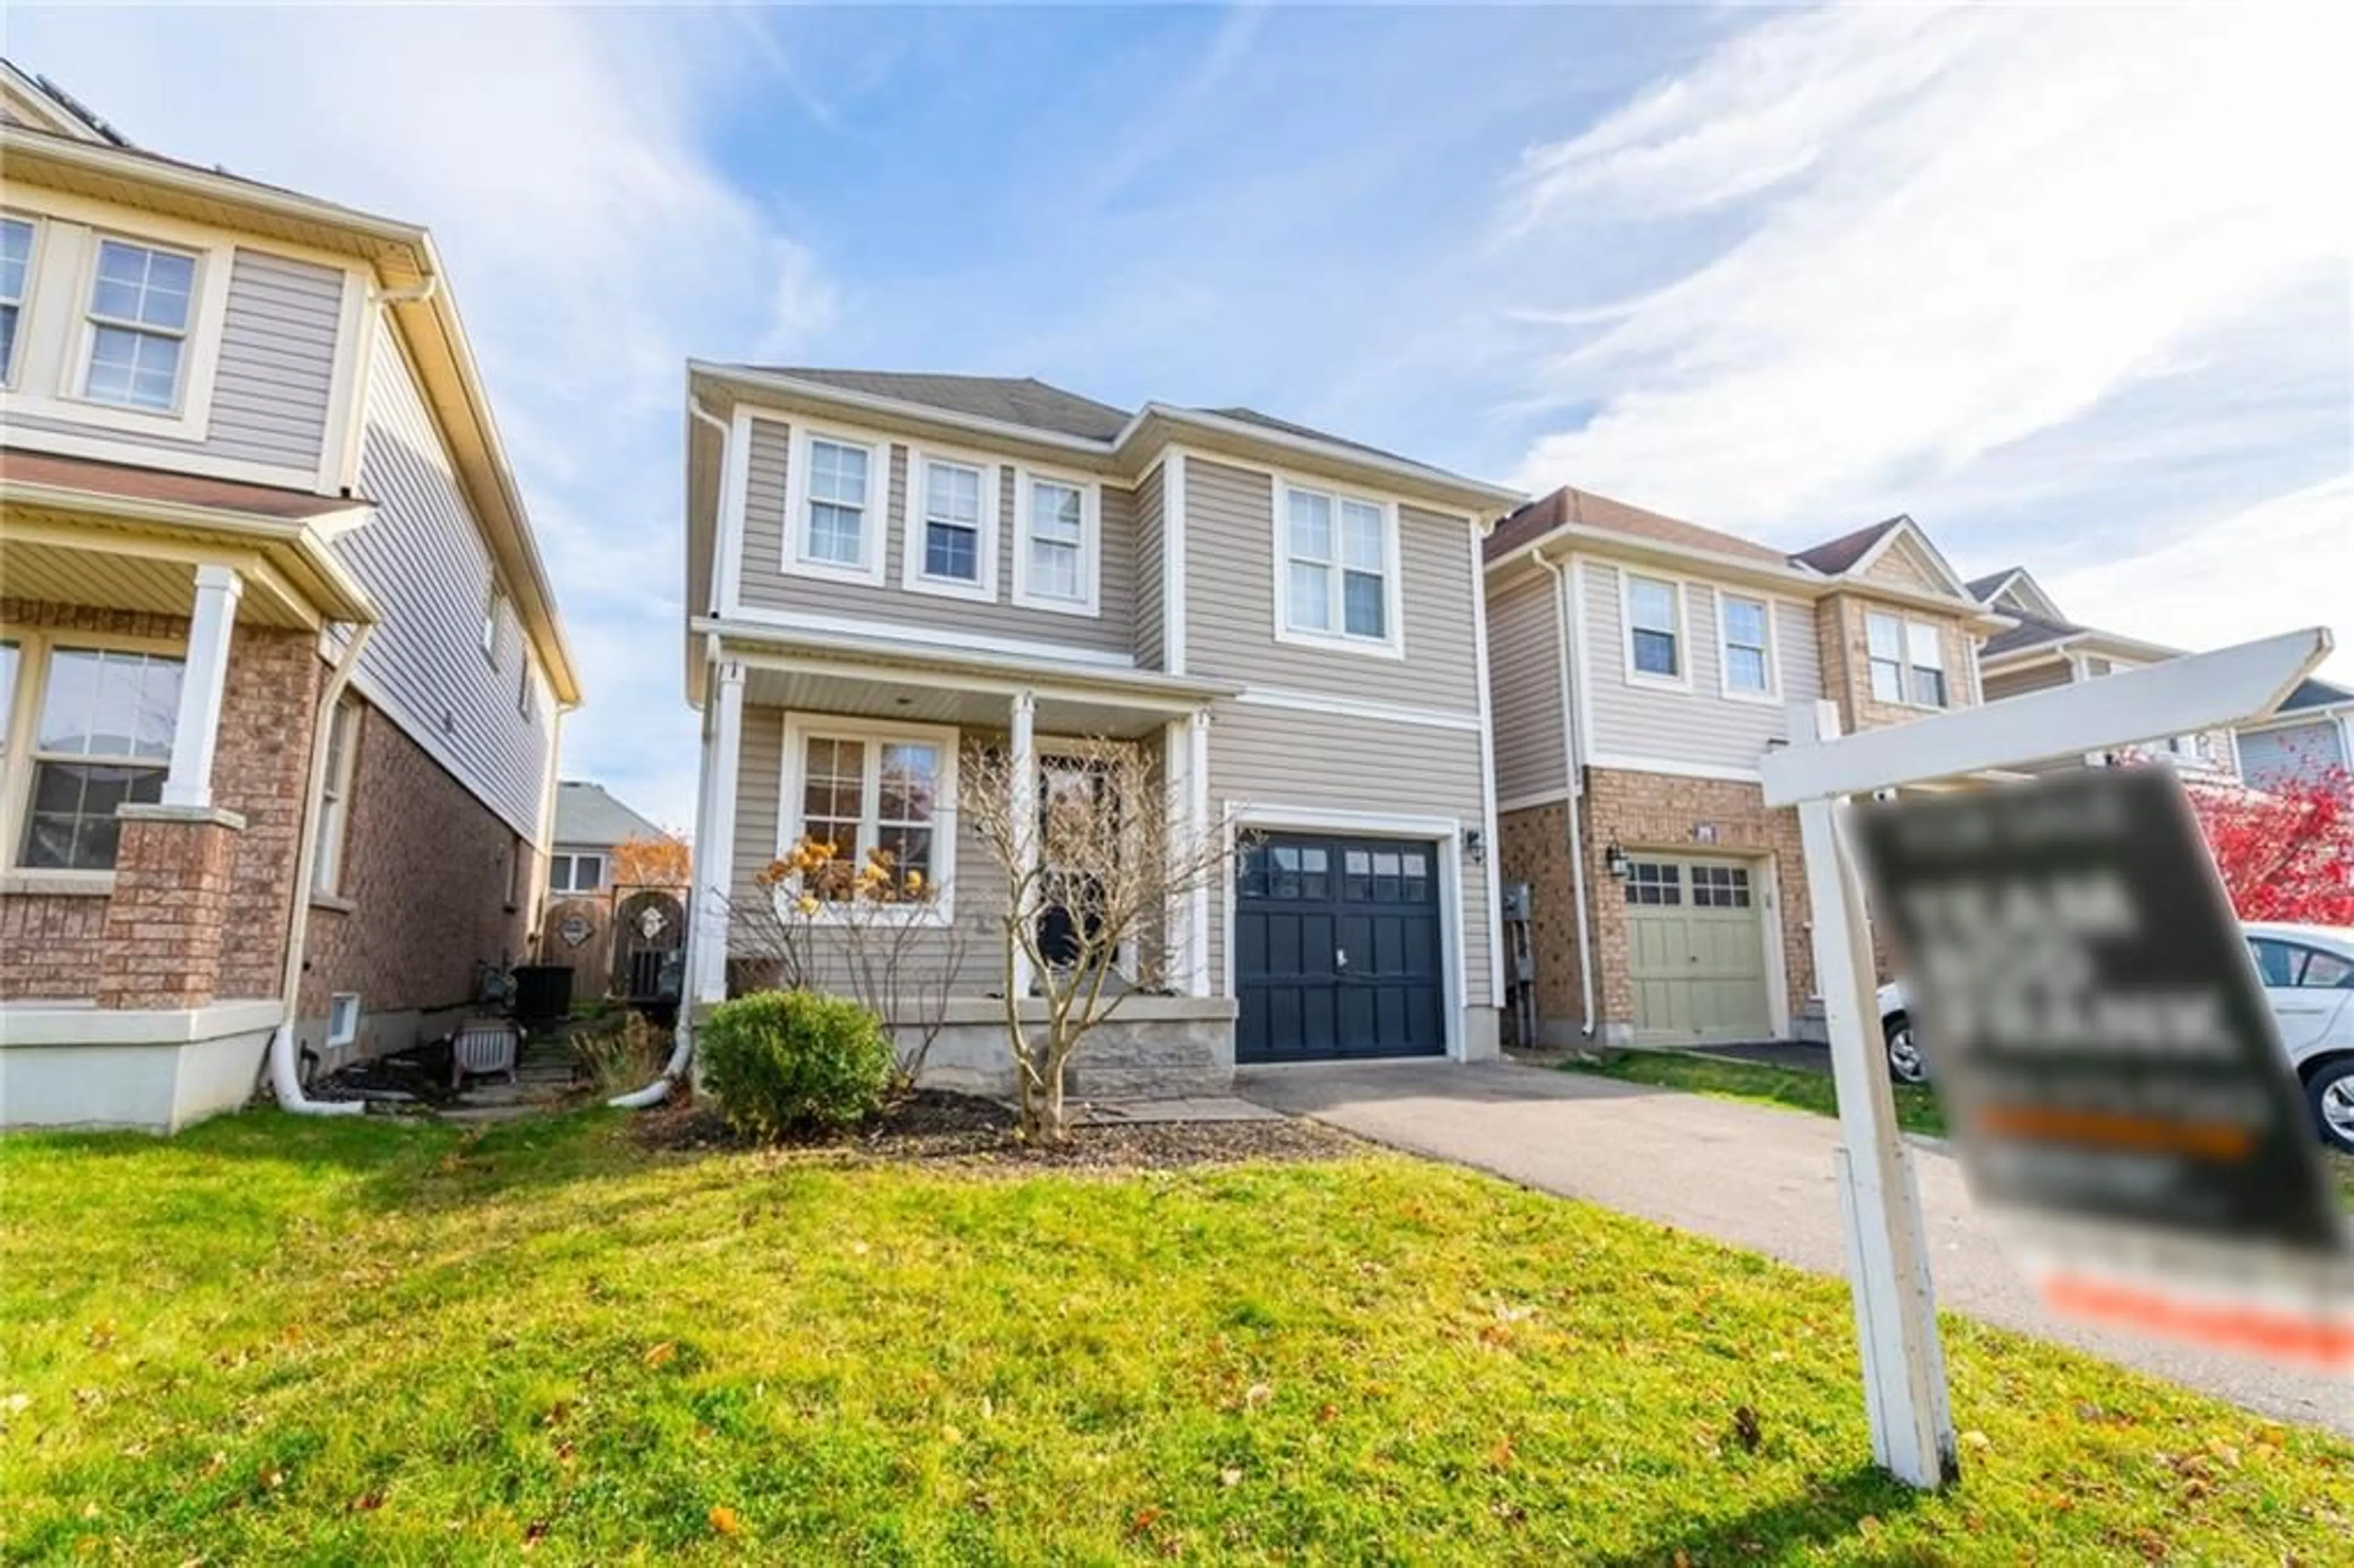 Frontside or backside of a home for 55 POWELL Dr, Binbrook Ontario L0R 1C0